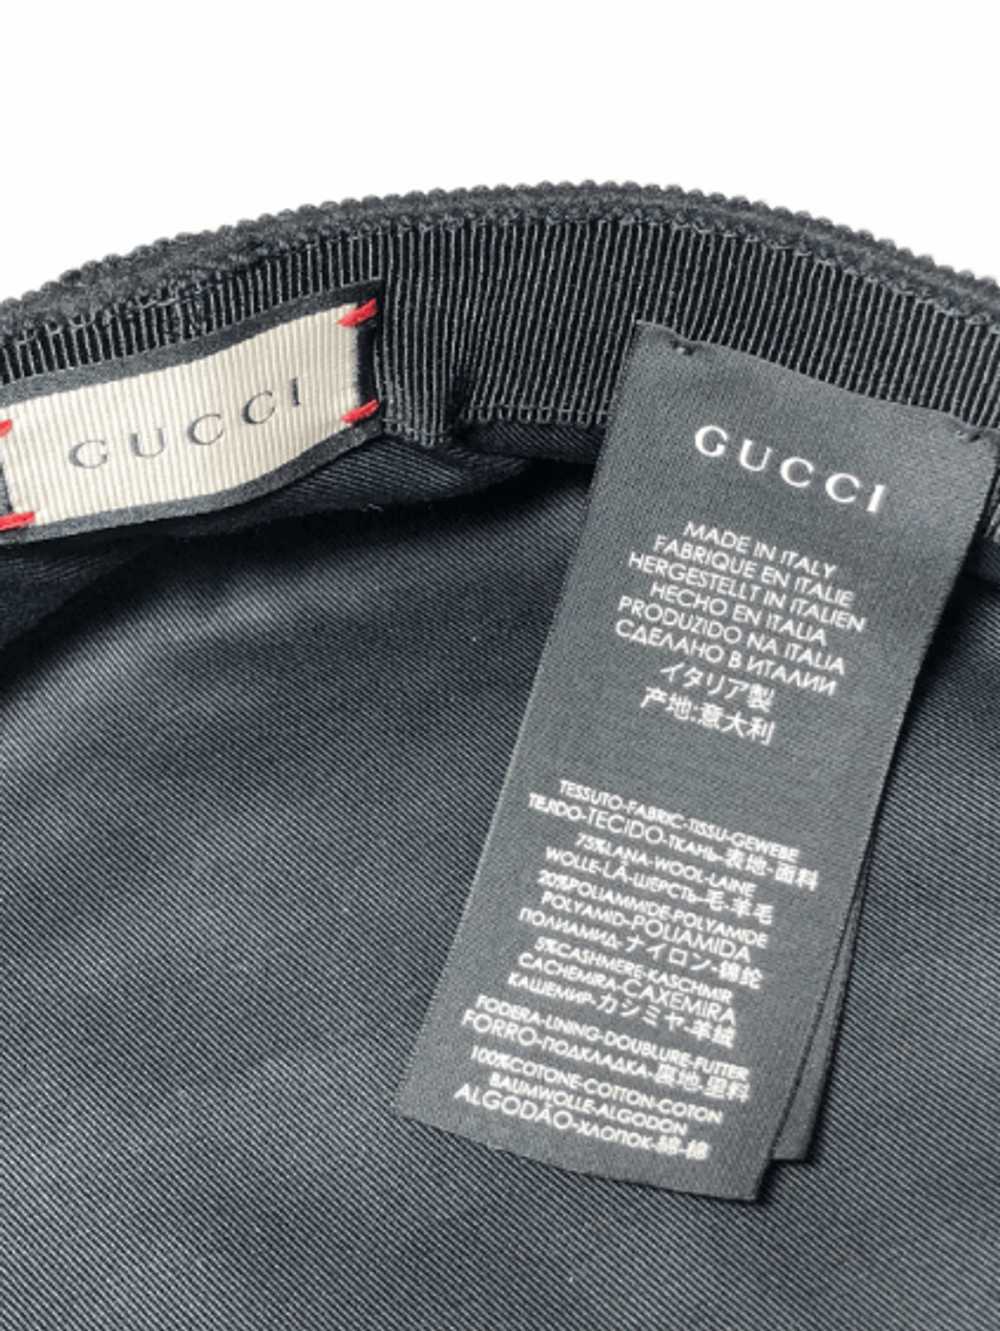 Gucci Black Wool Cashmere Newsboy Cap With Patent… - image 3